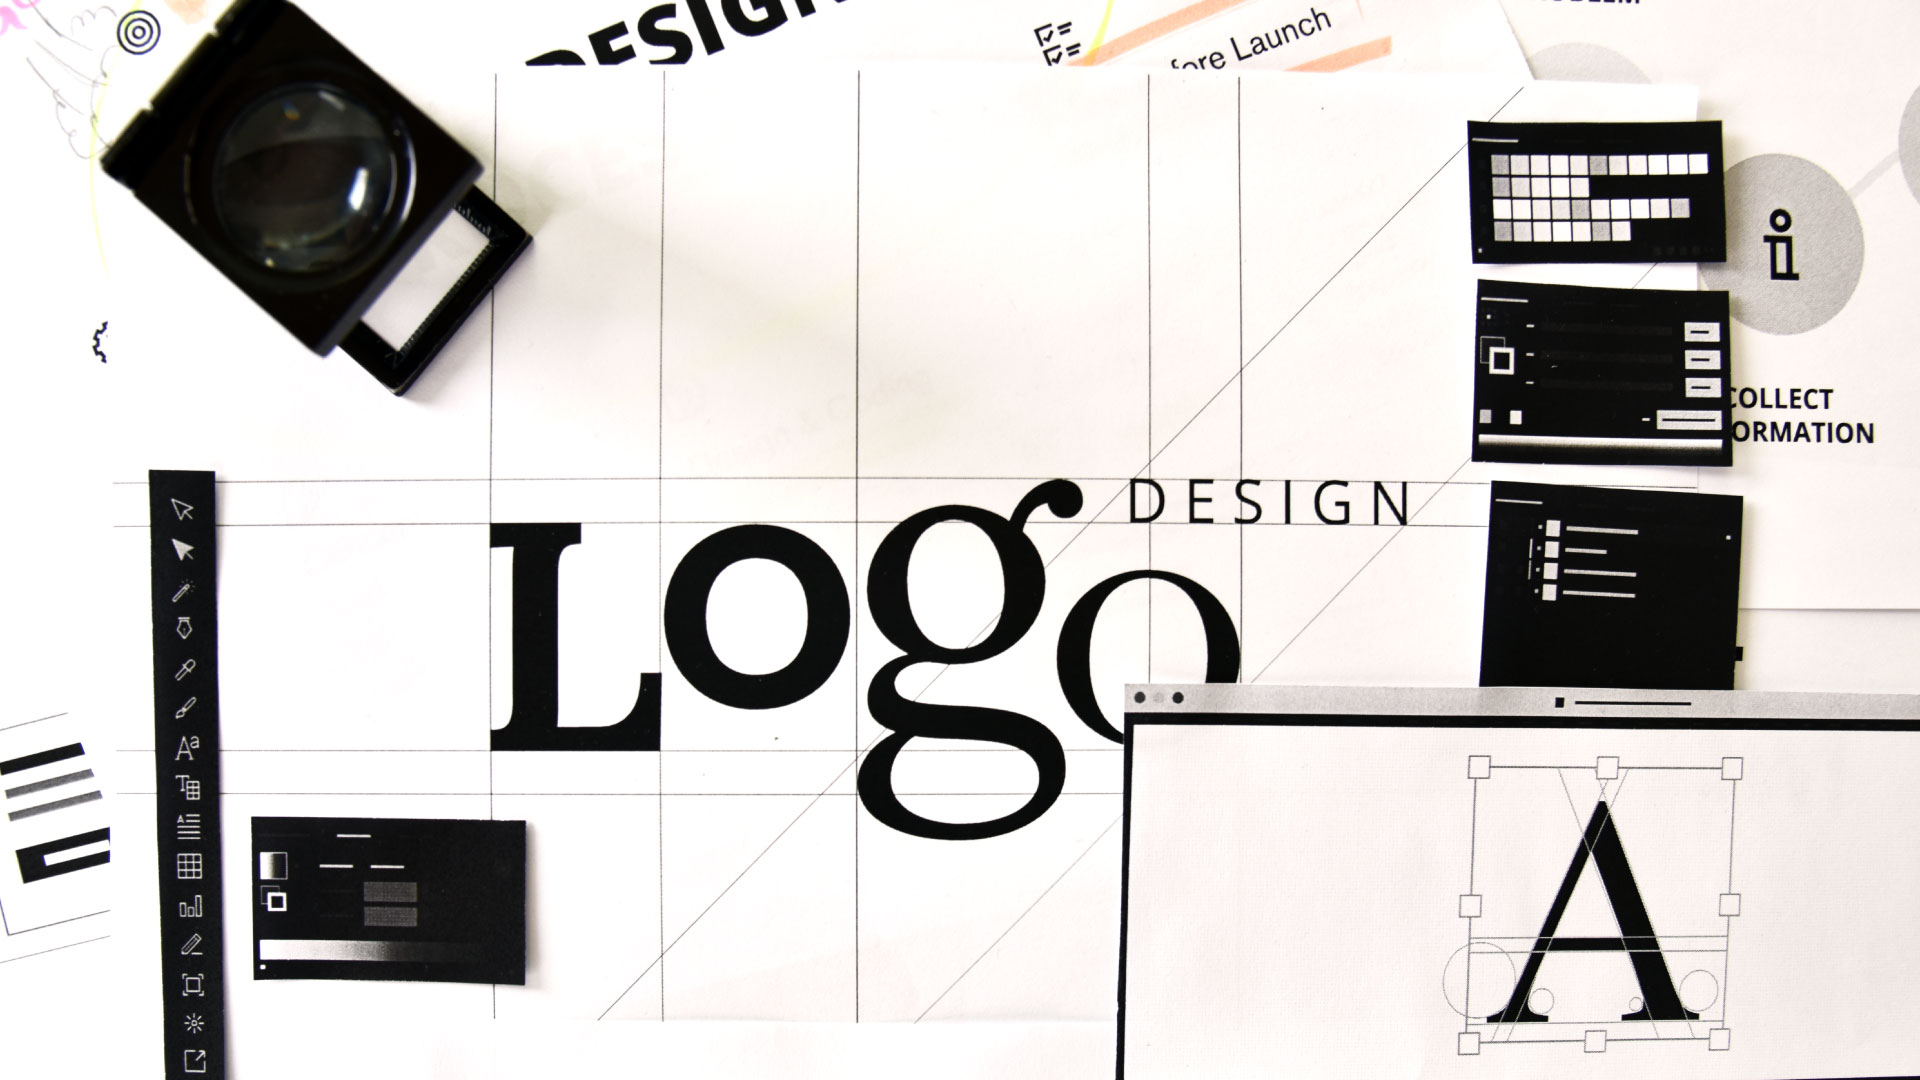 What Constitutes a Visual Brand Identity?